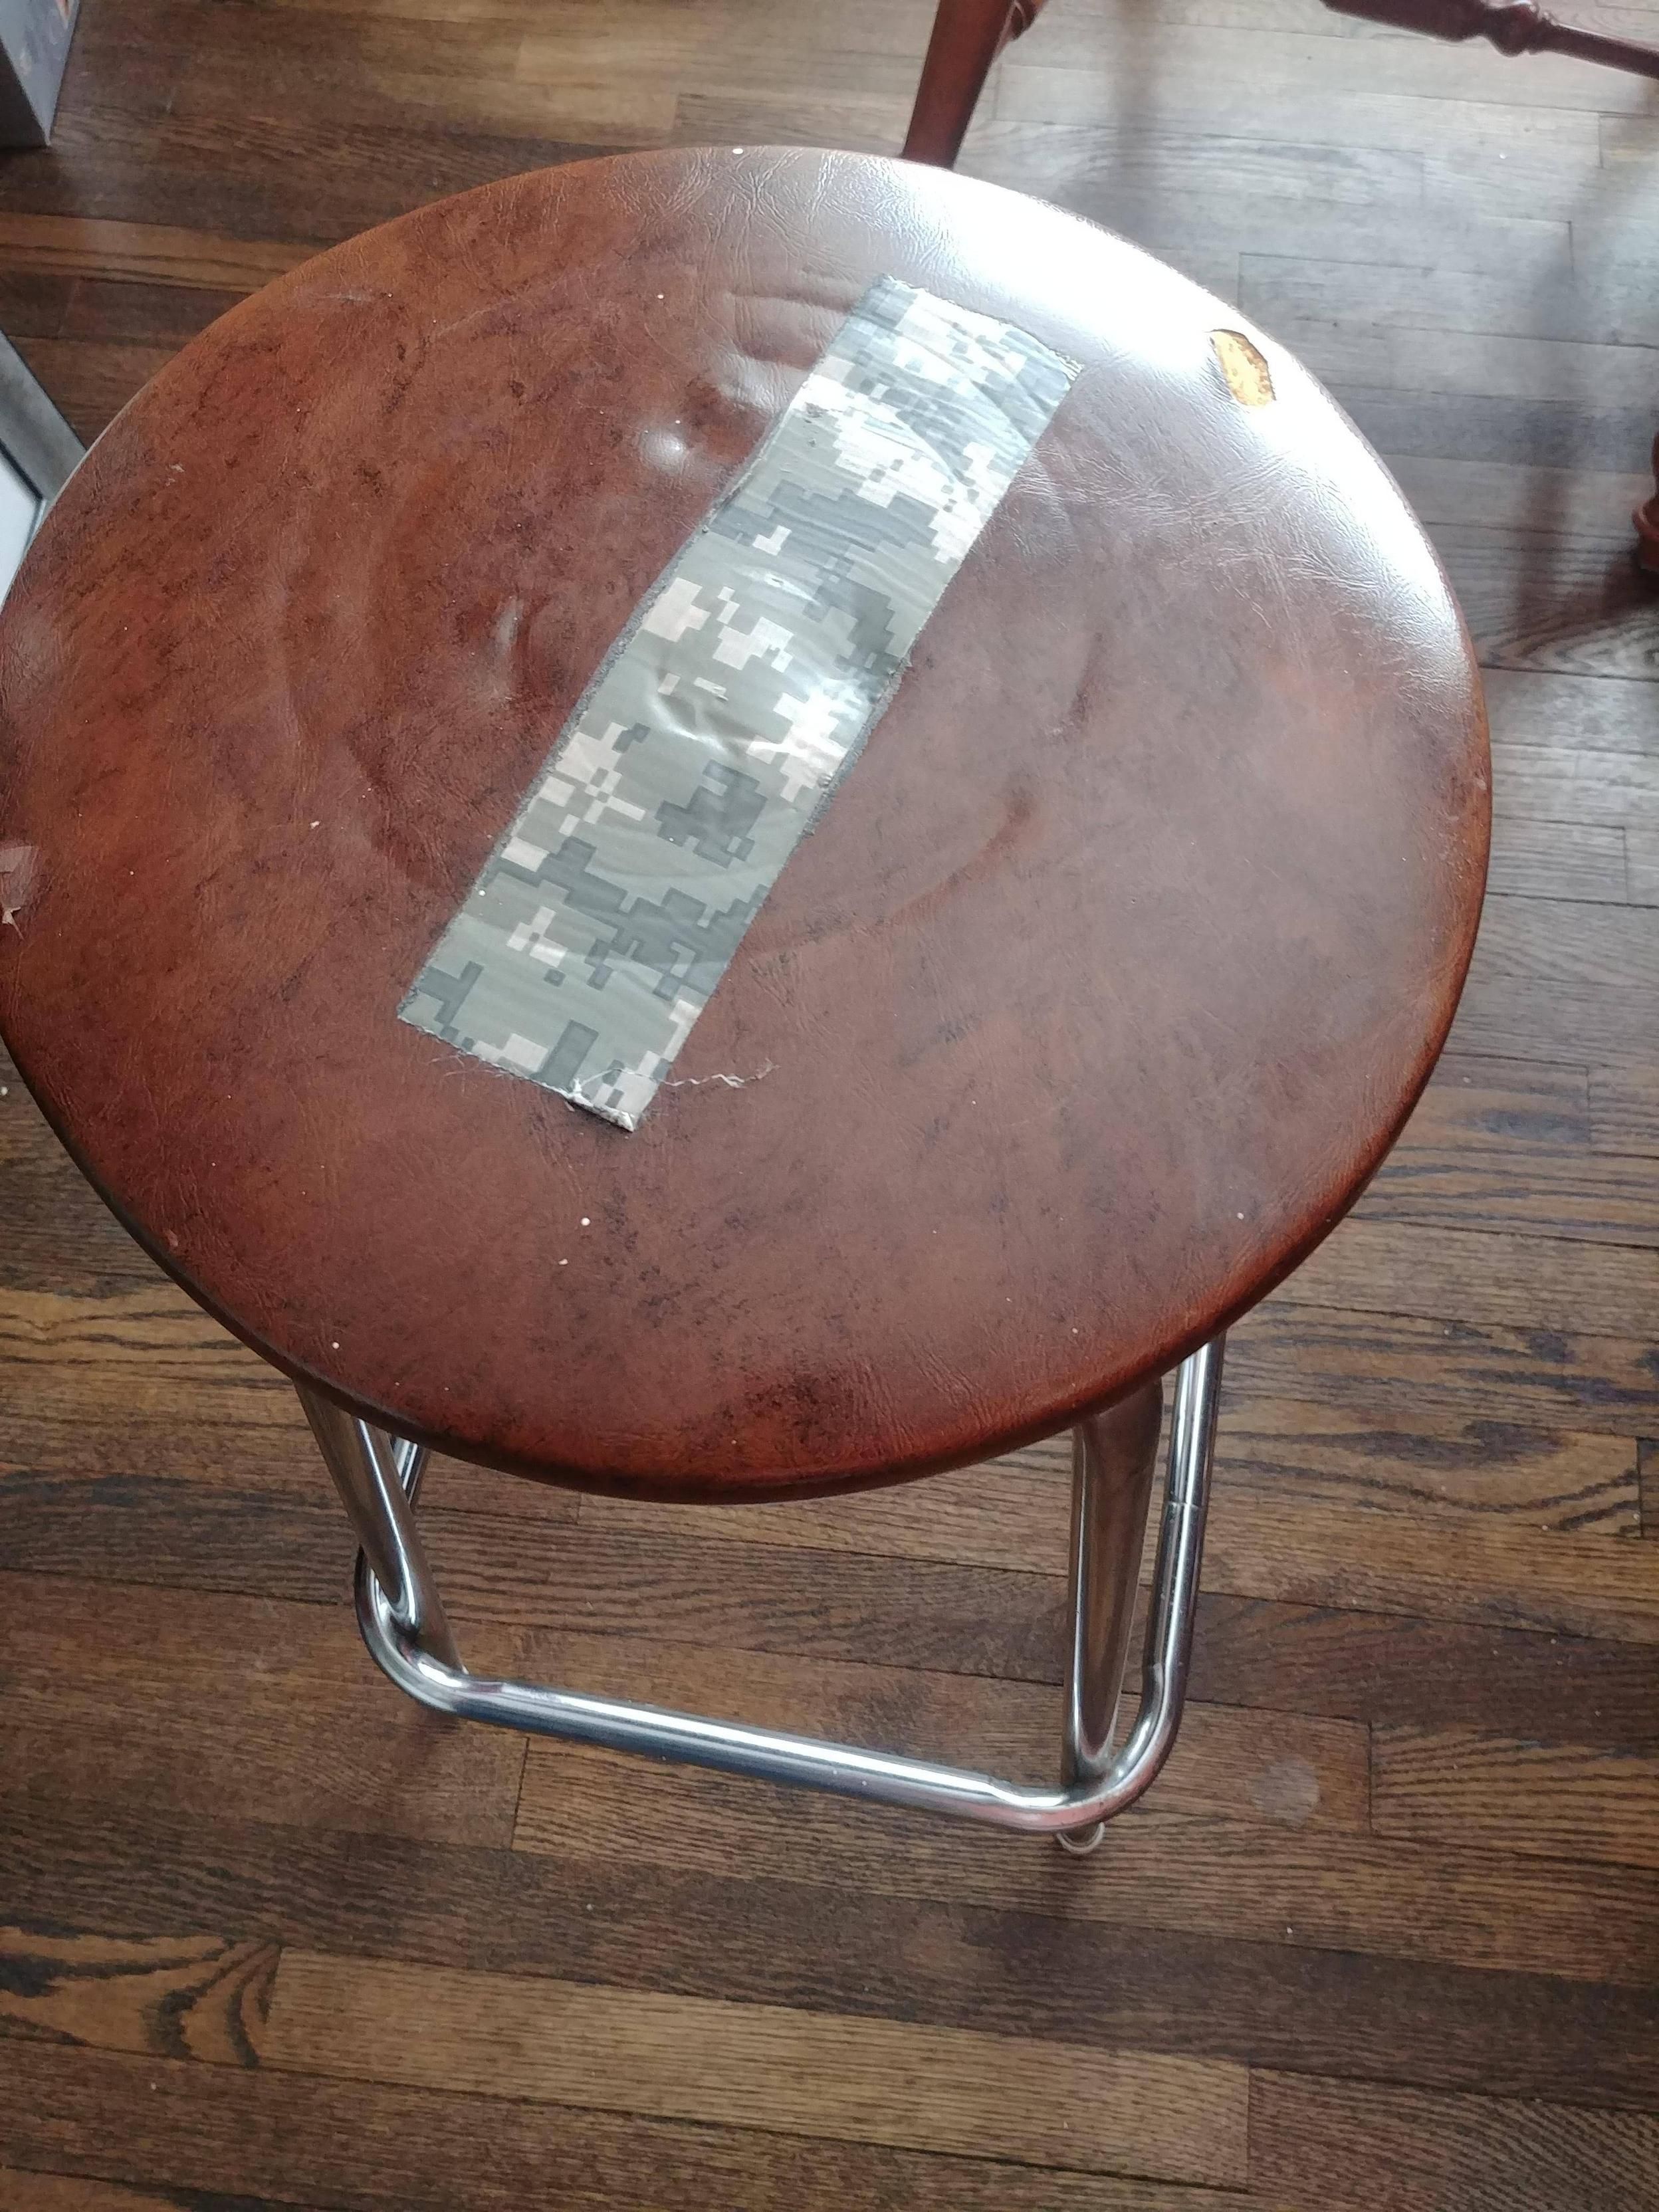 My dad said he patched the hole in the barstool so well, "you can't even see it."